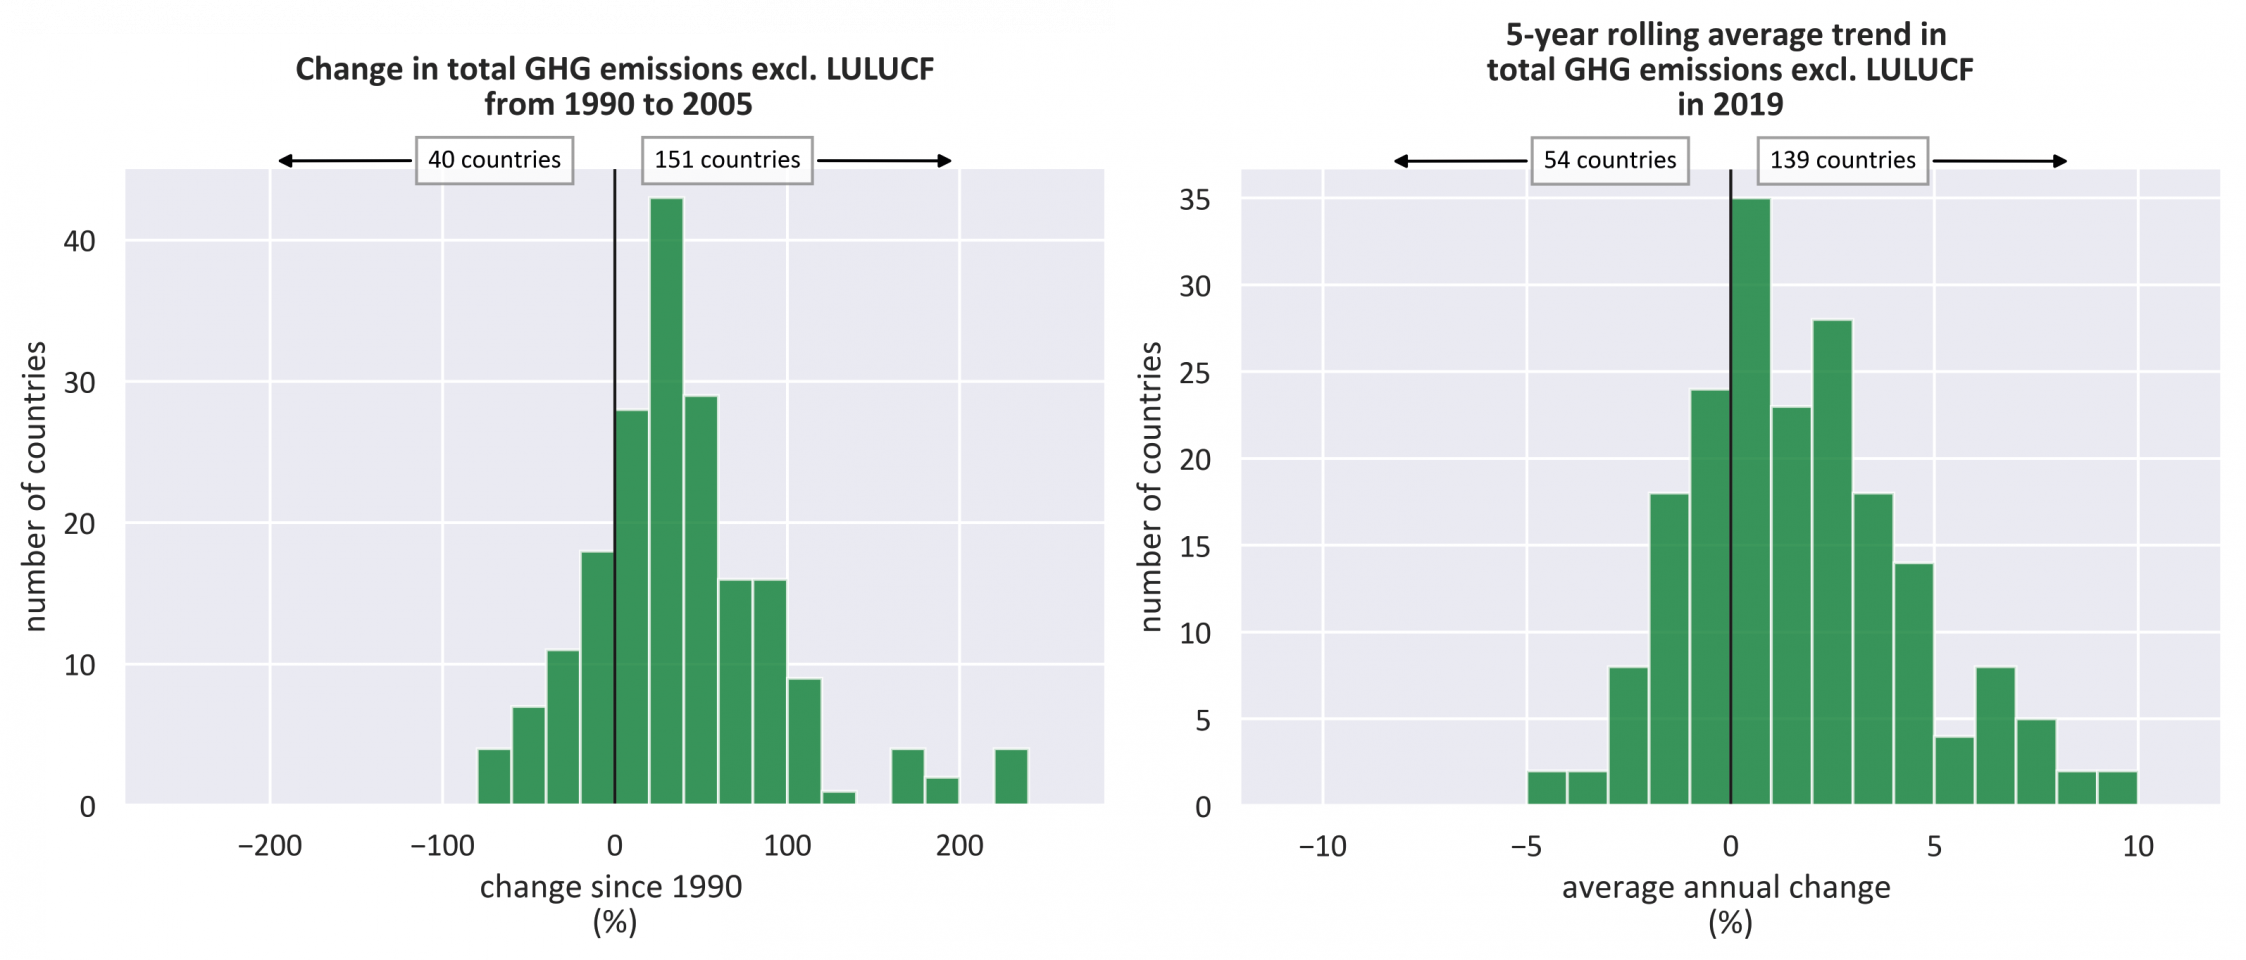 Change in greenhouse gas (GHG) emissions compared to 2005 (left) and average annual change in GHG emissions in the past five years (right). 